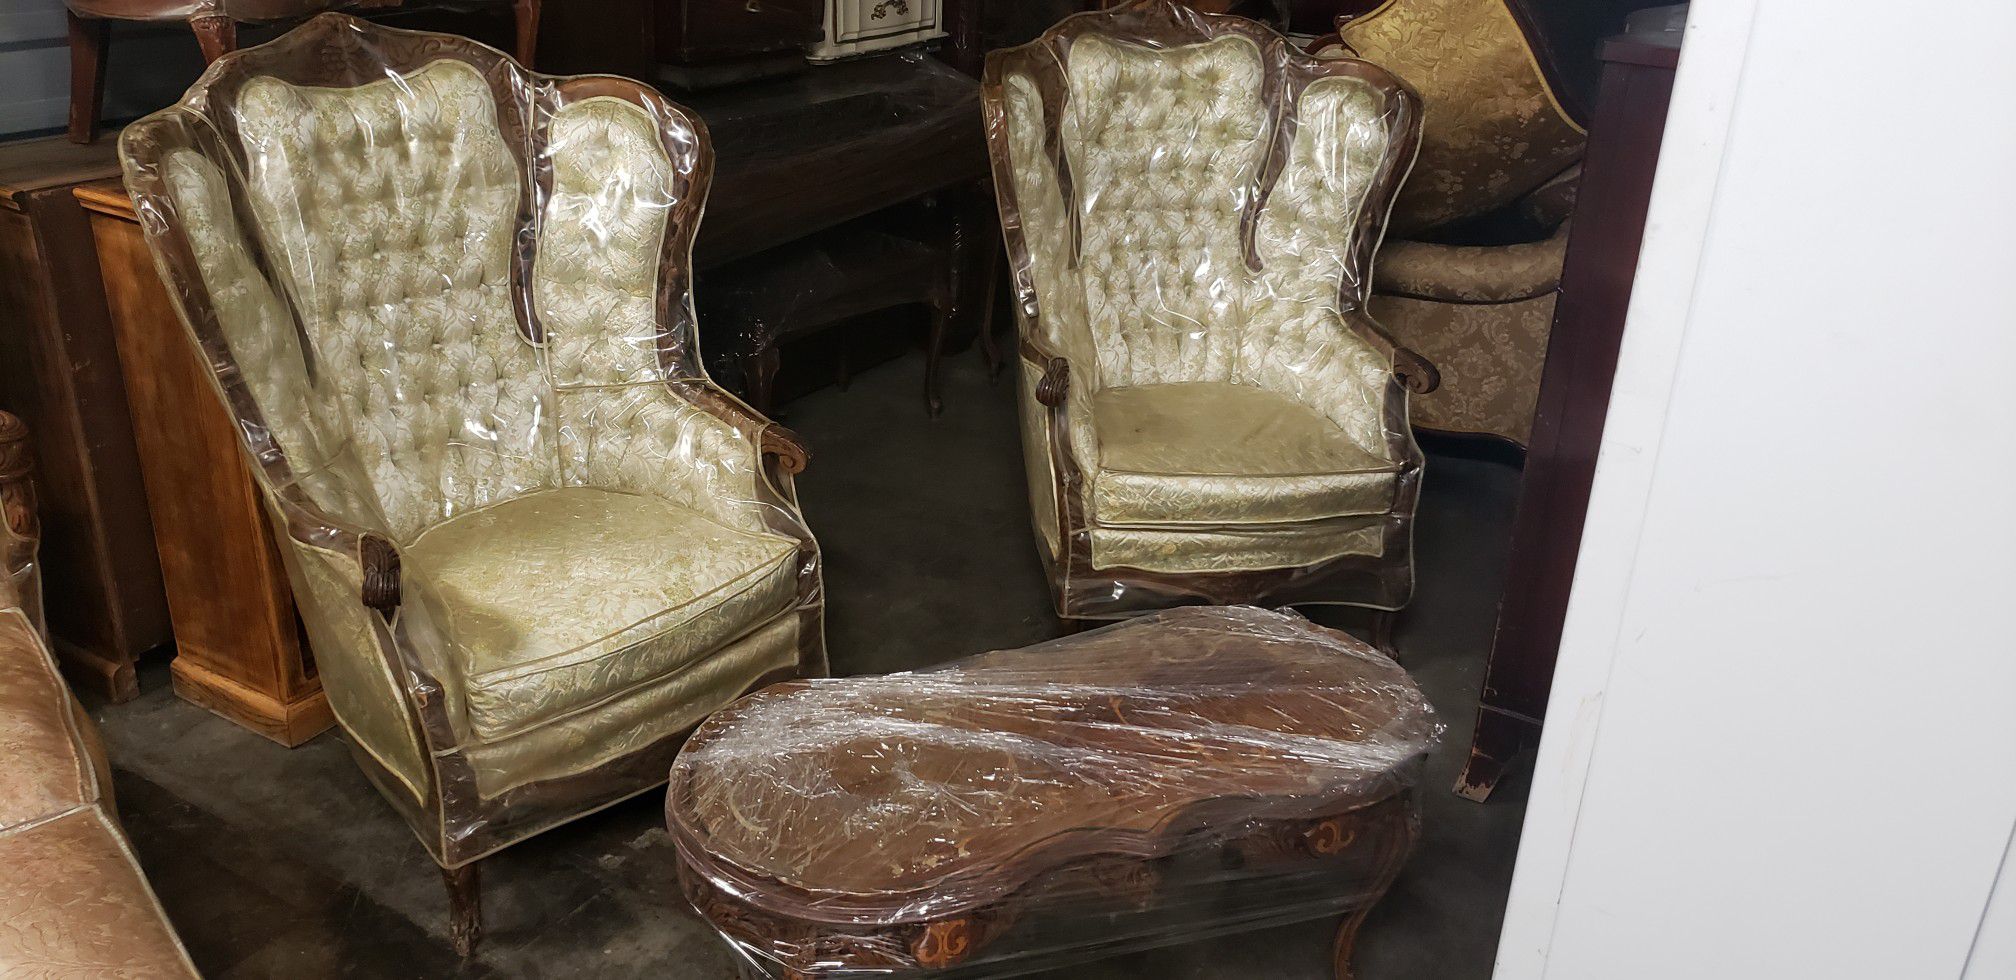 Exclusive!! Antiques furniture for sale several beautiful pieces custom chairs and hand carvings (chairs $300.00) (large chairs $300.00)